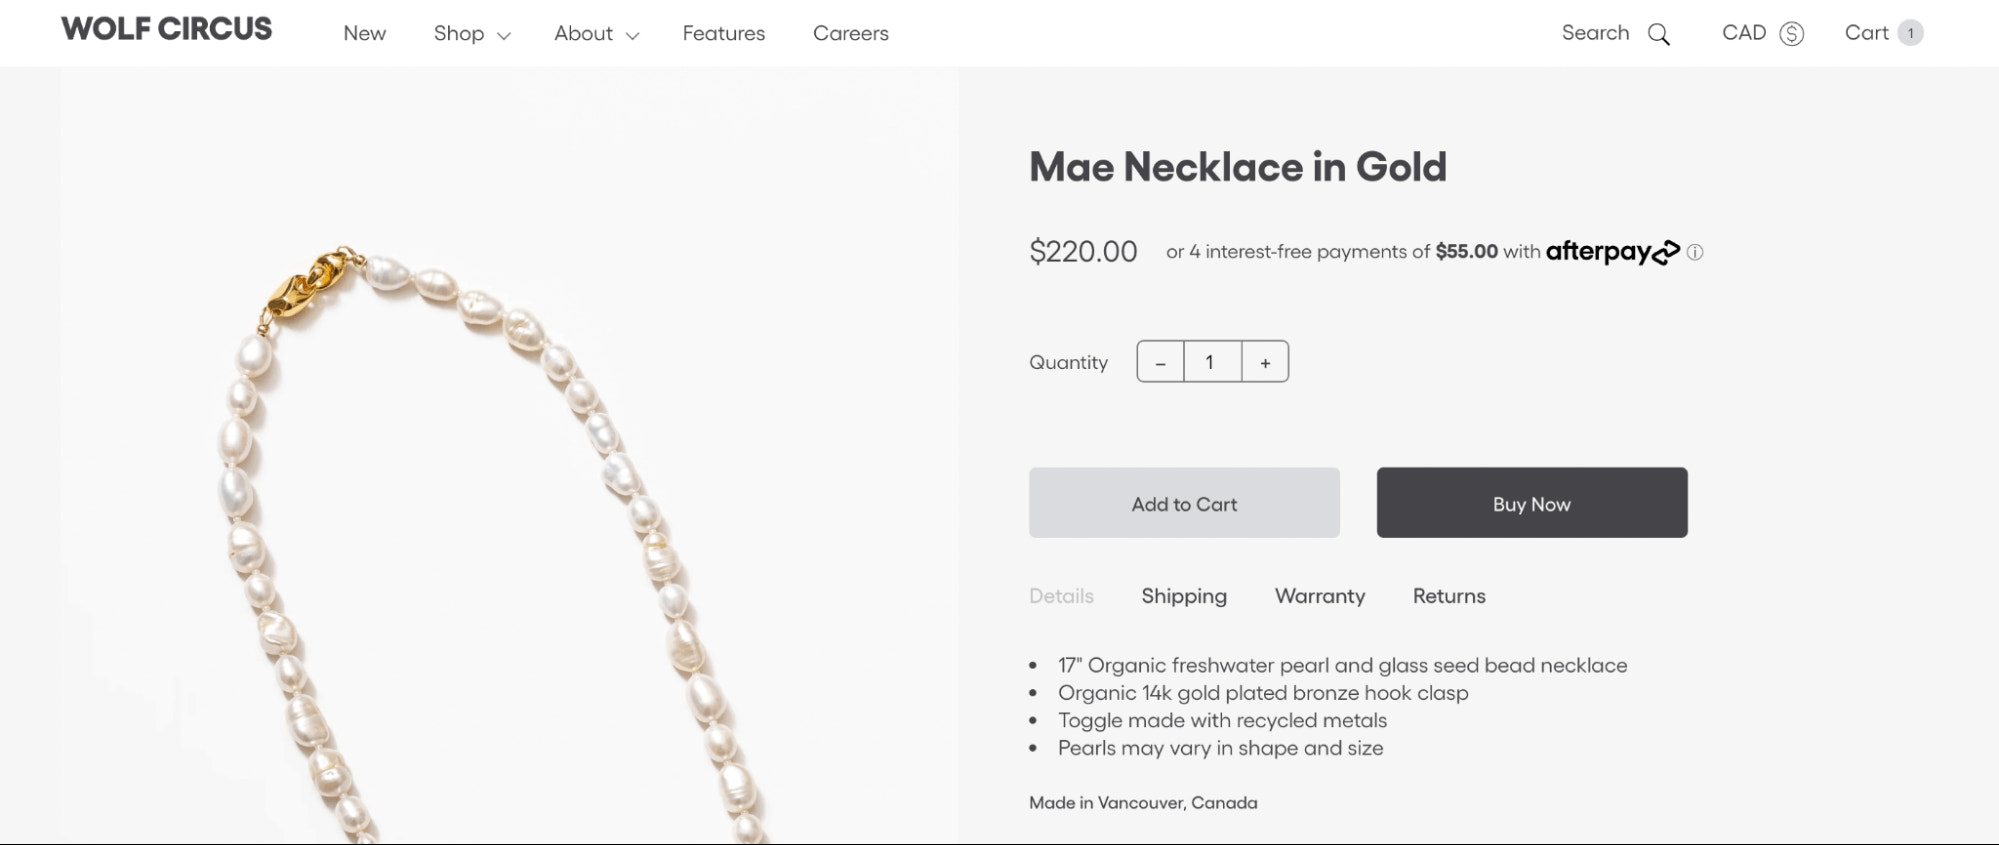 Gold necklace product page showing how a $220 product can be paid for in four installments of $55 using AfterPay.